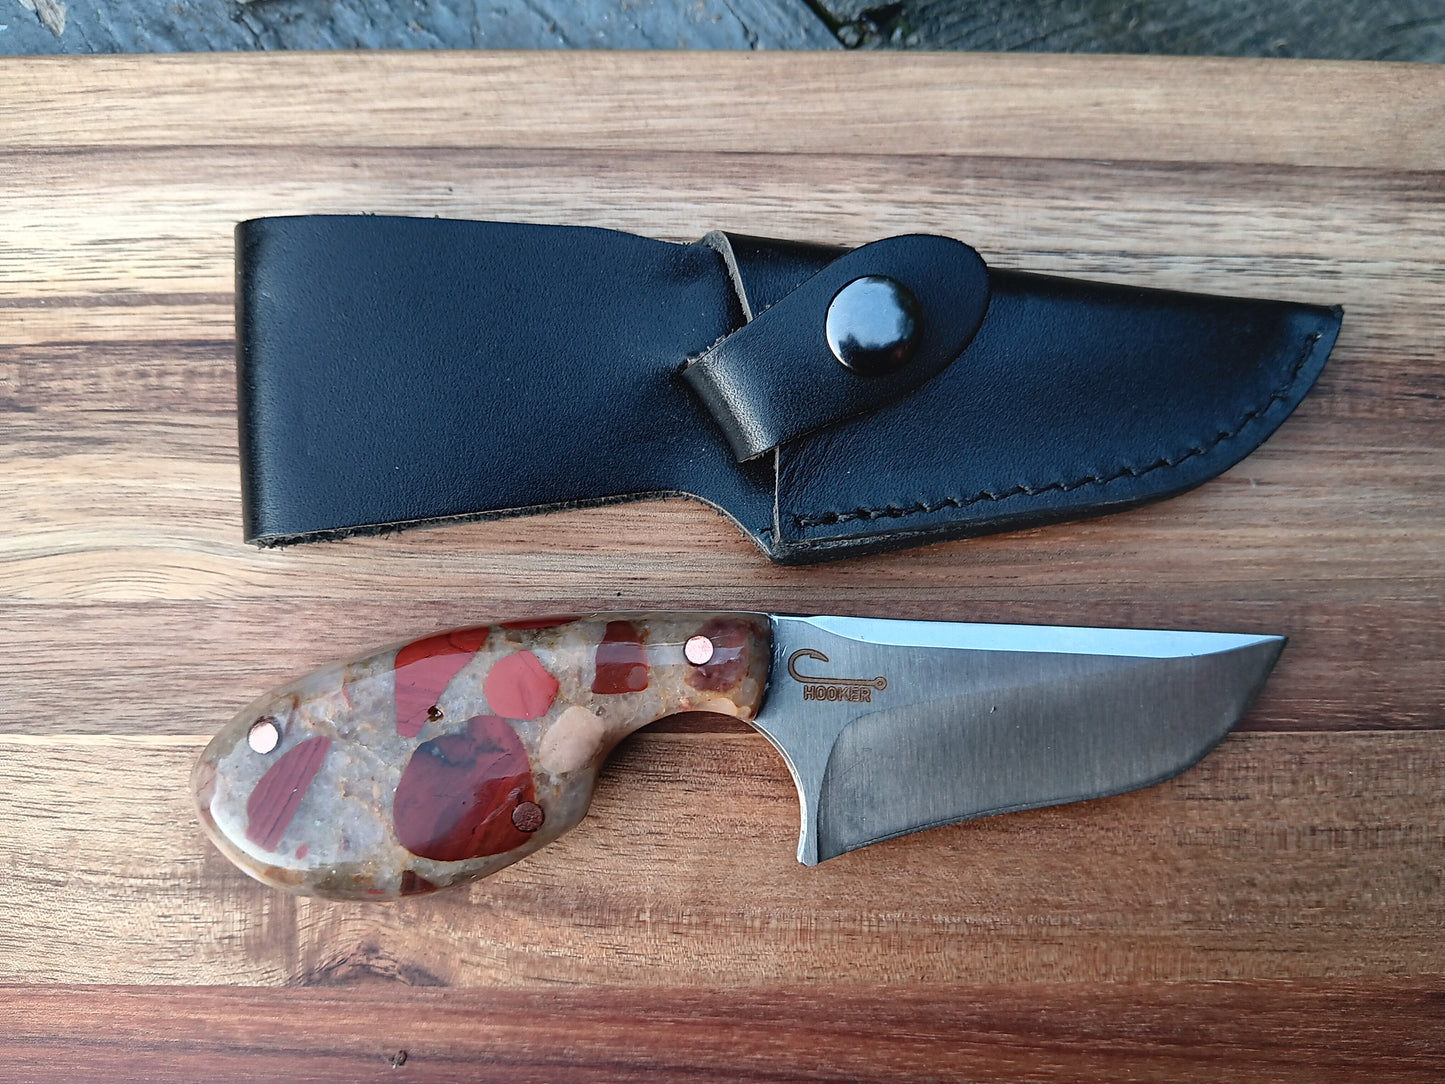 Pudding Stone Skinner Knife with Stainless Steel Blade